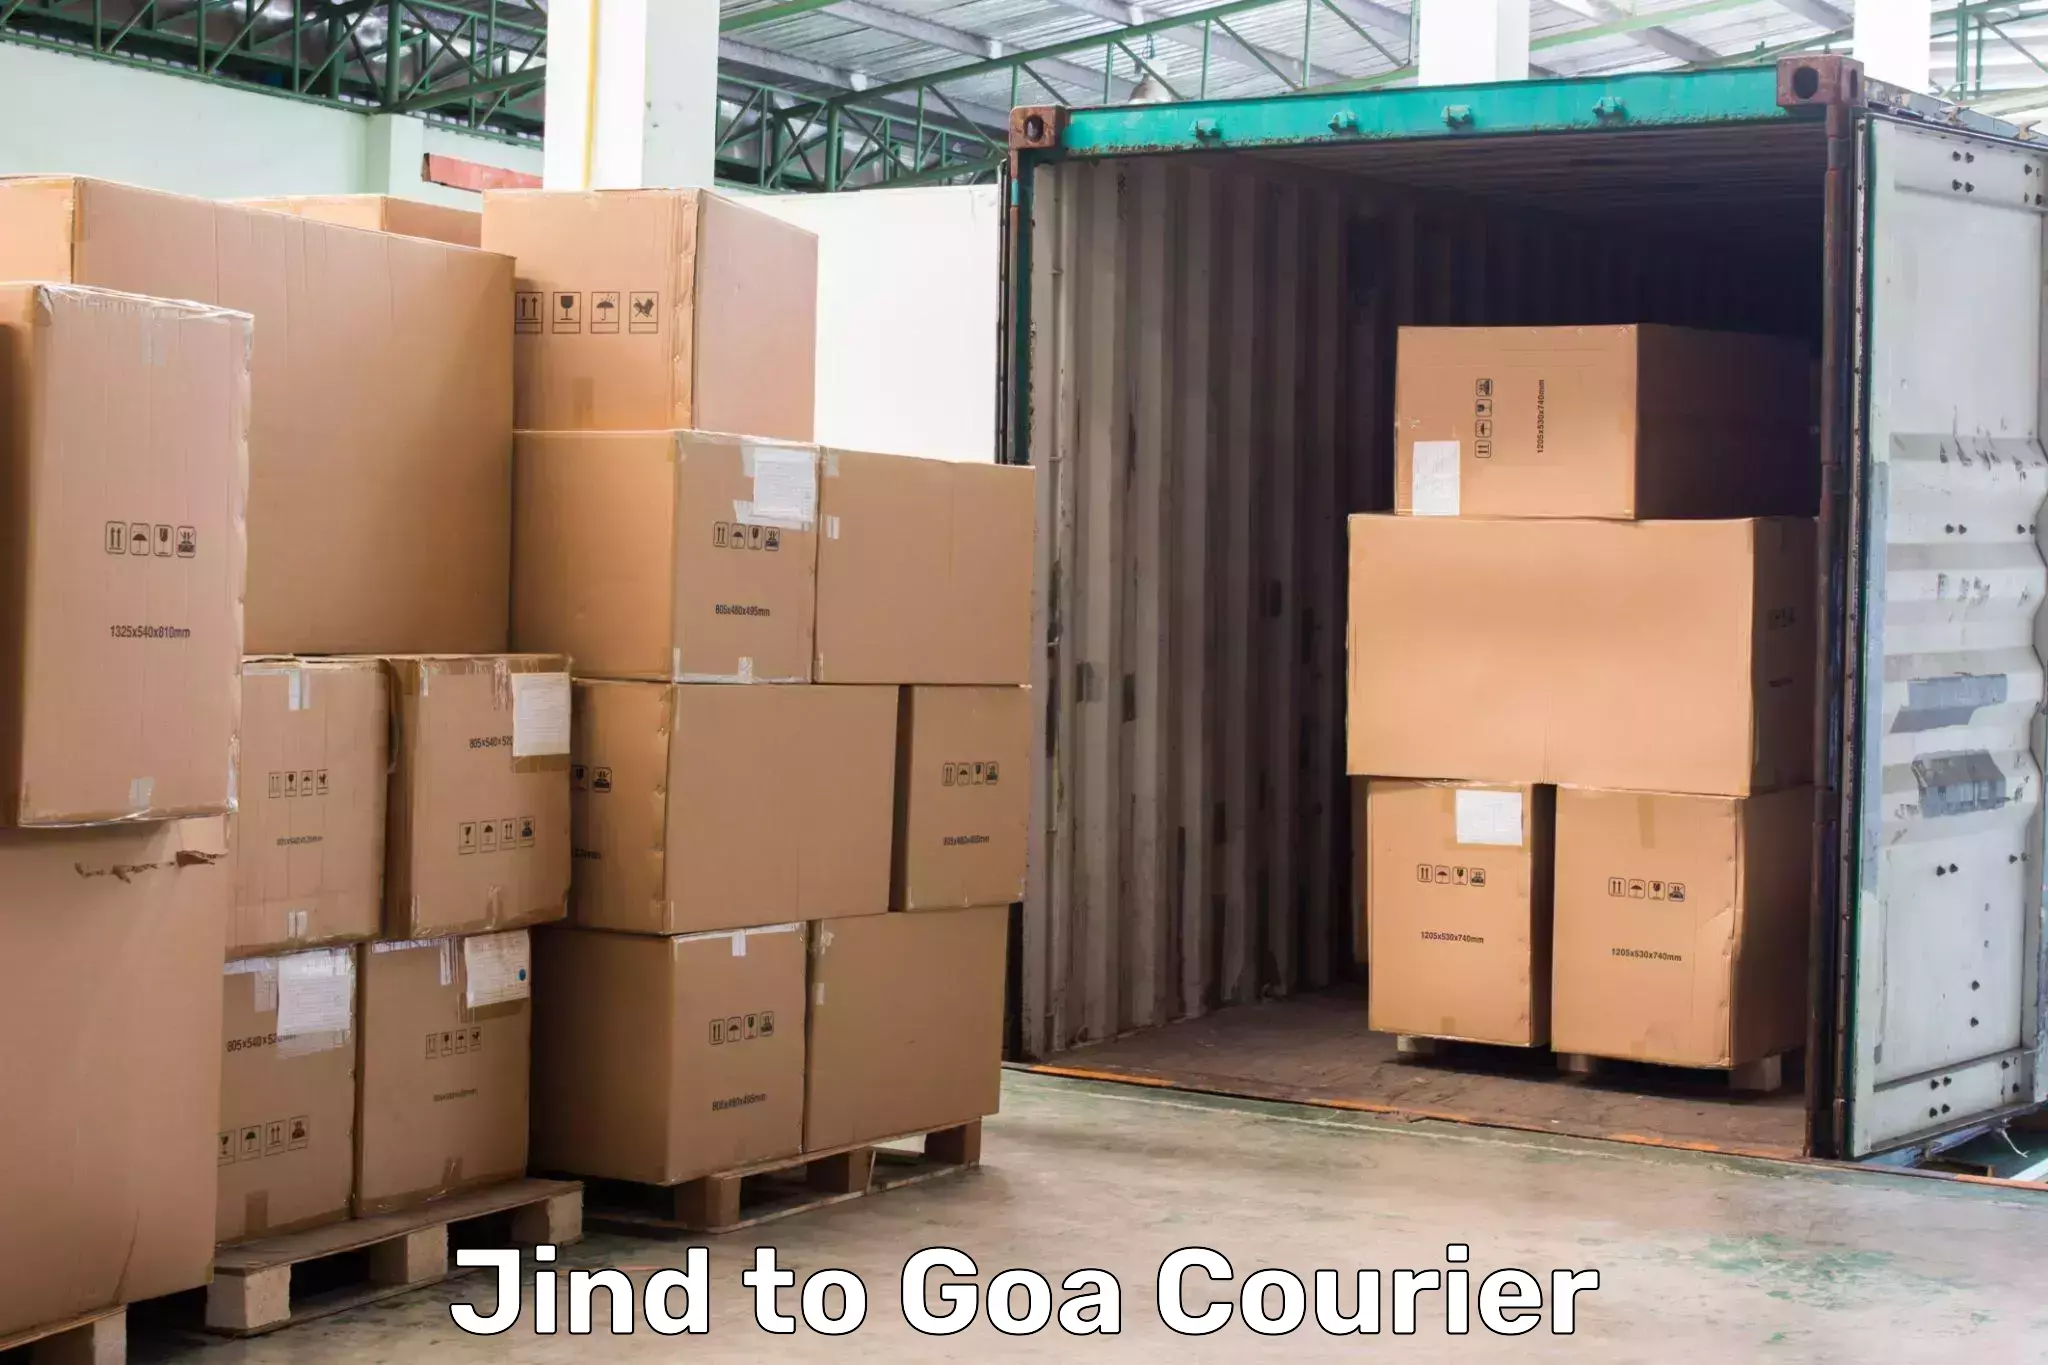 State-of-the-art courier technology Jind to Goa